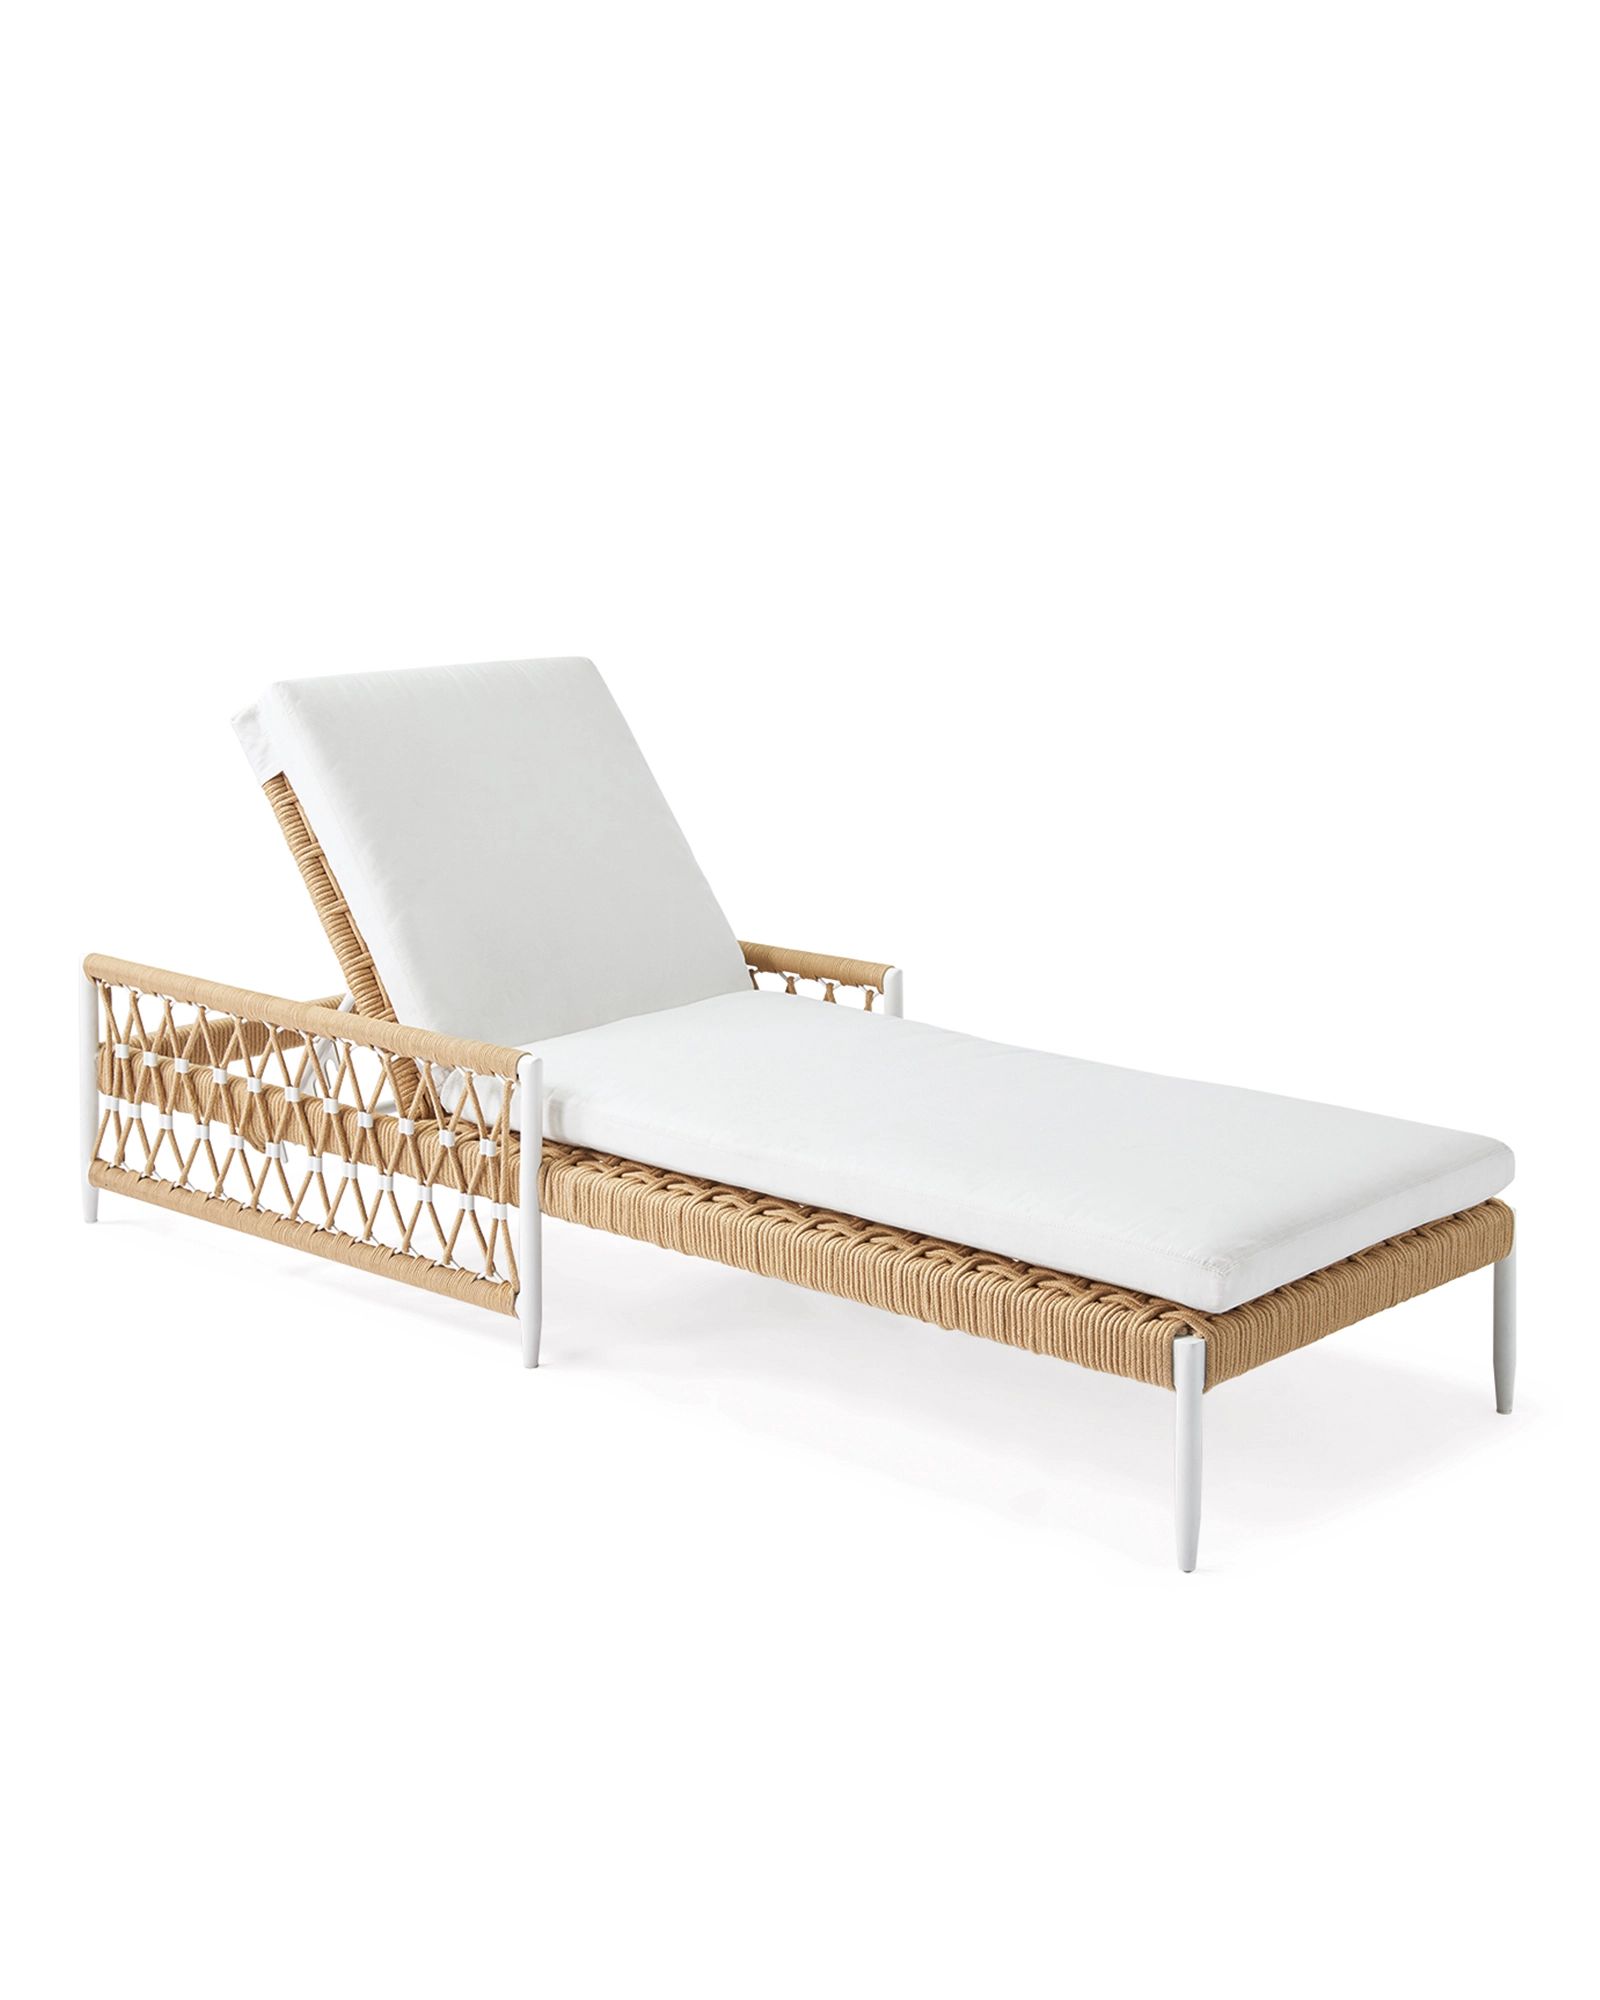 Salt Creek Chaise | Serena and Lily